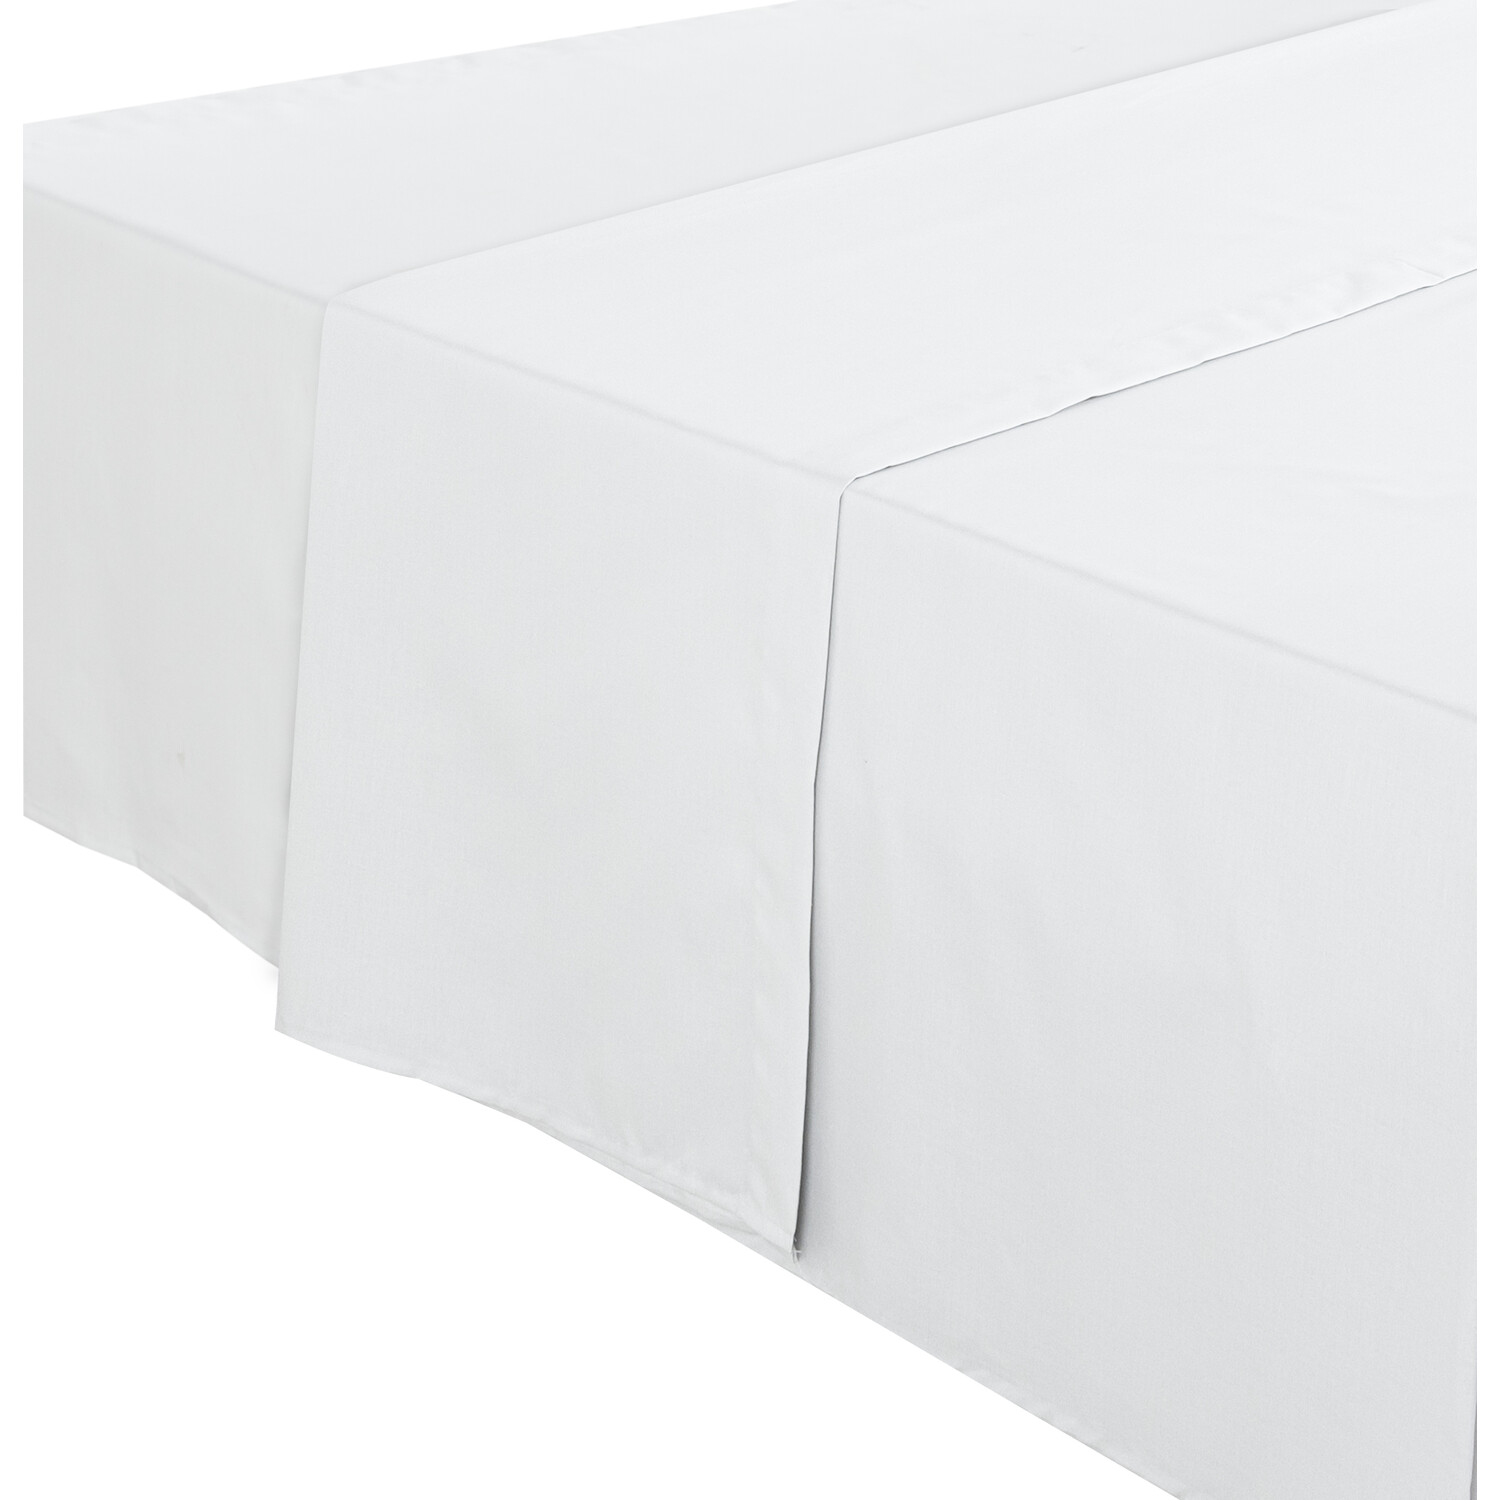 My Home Double White Flat Bedsheet Image 1